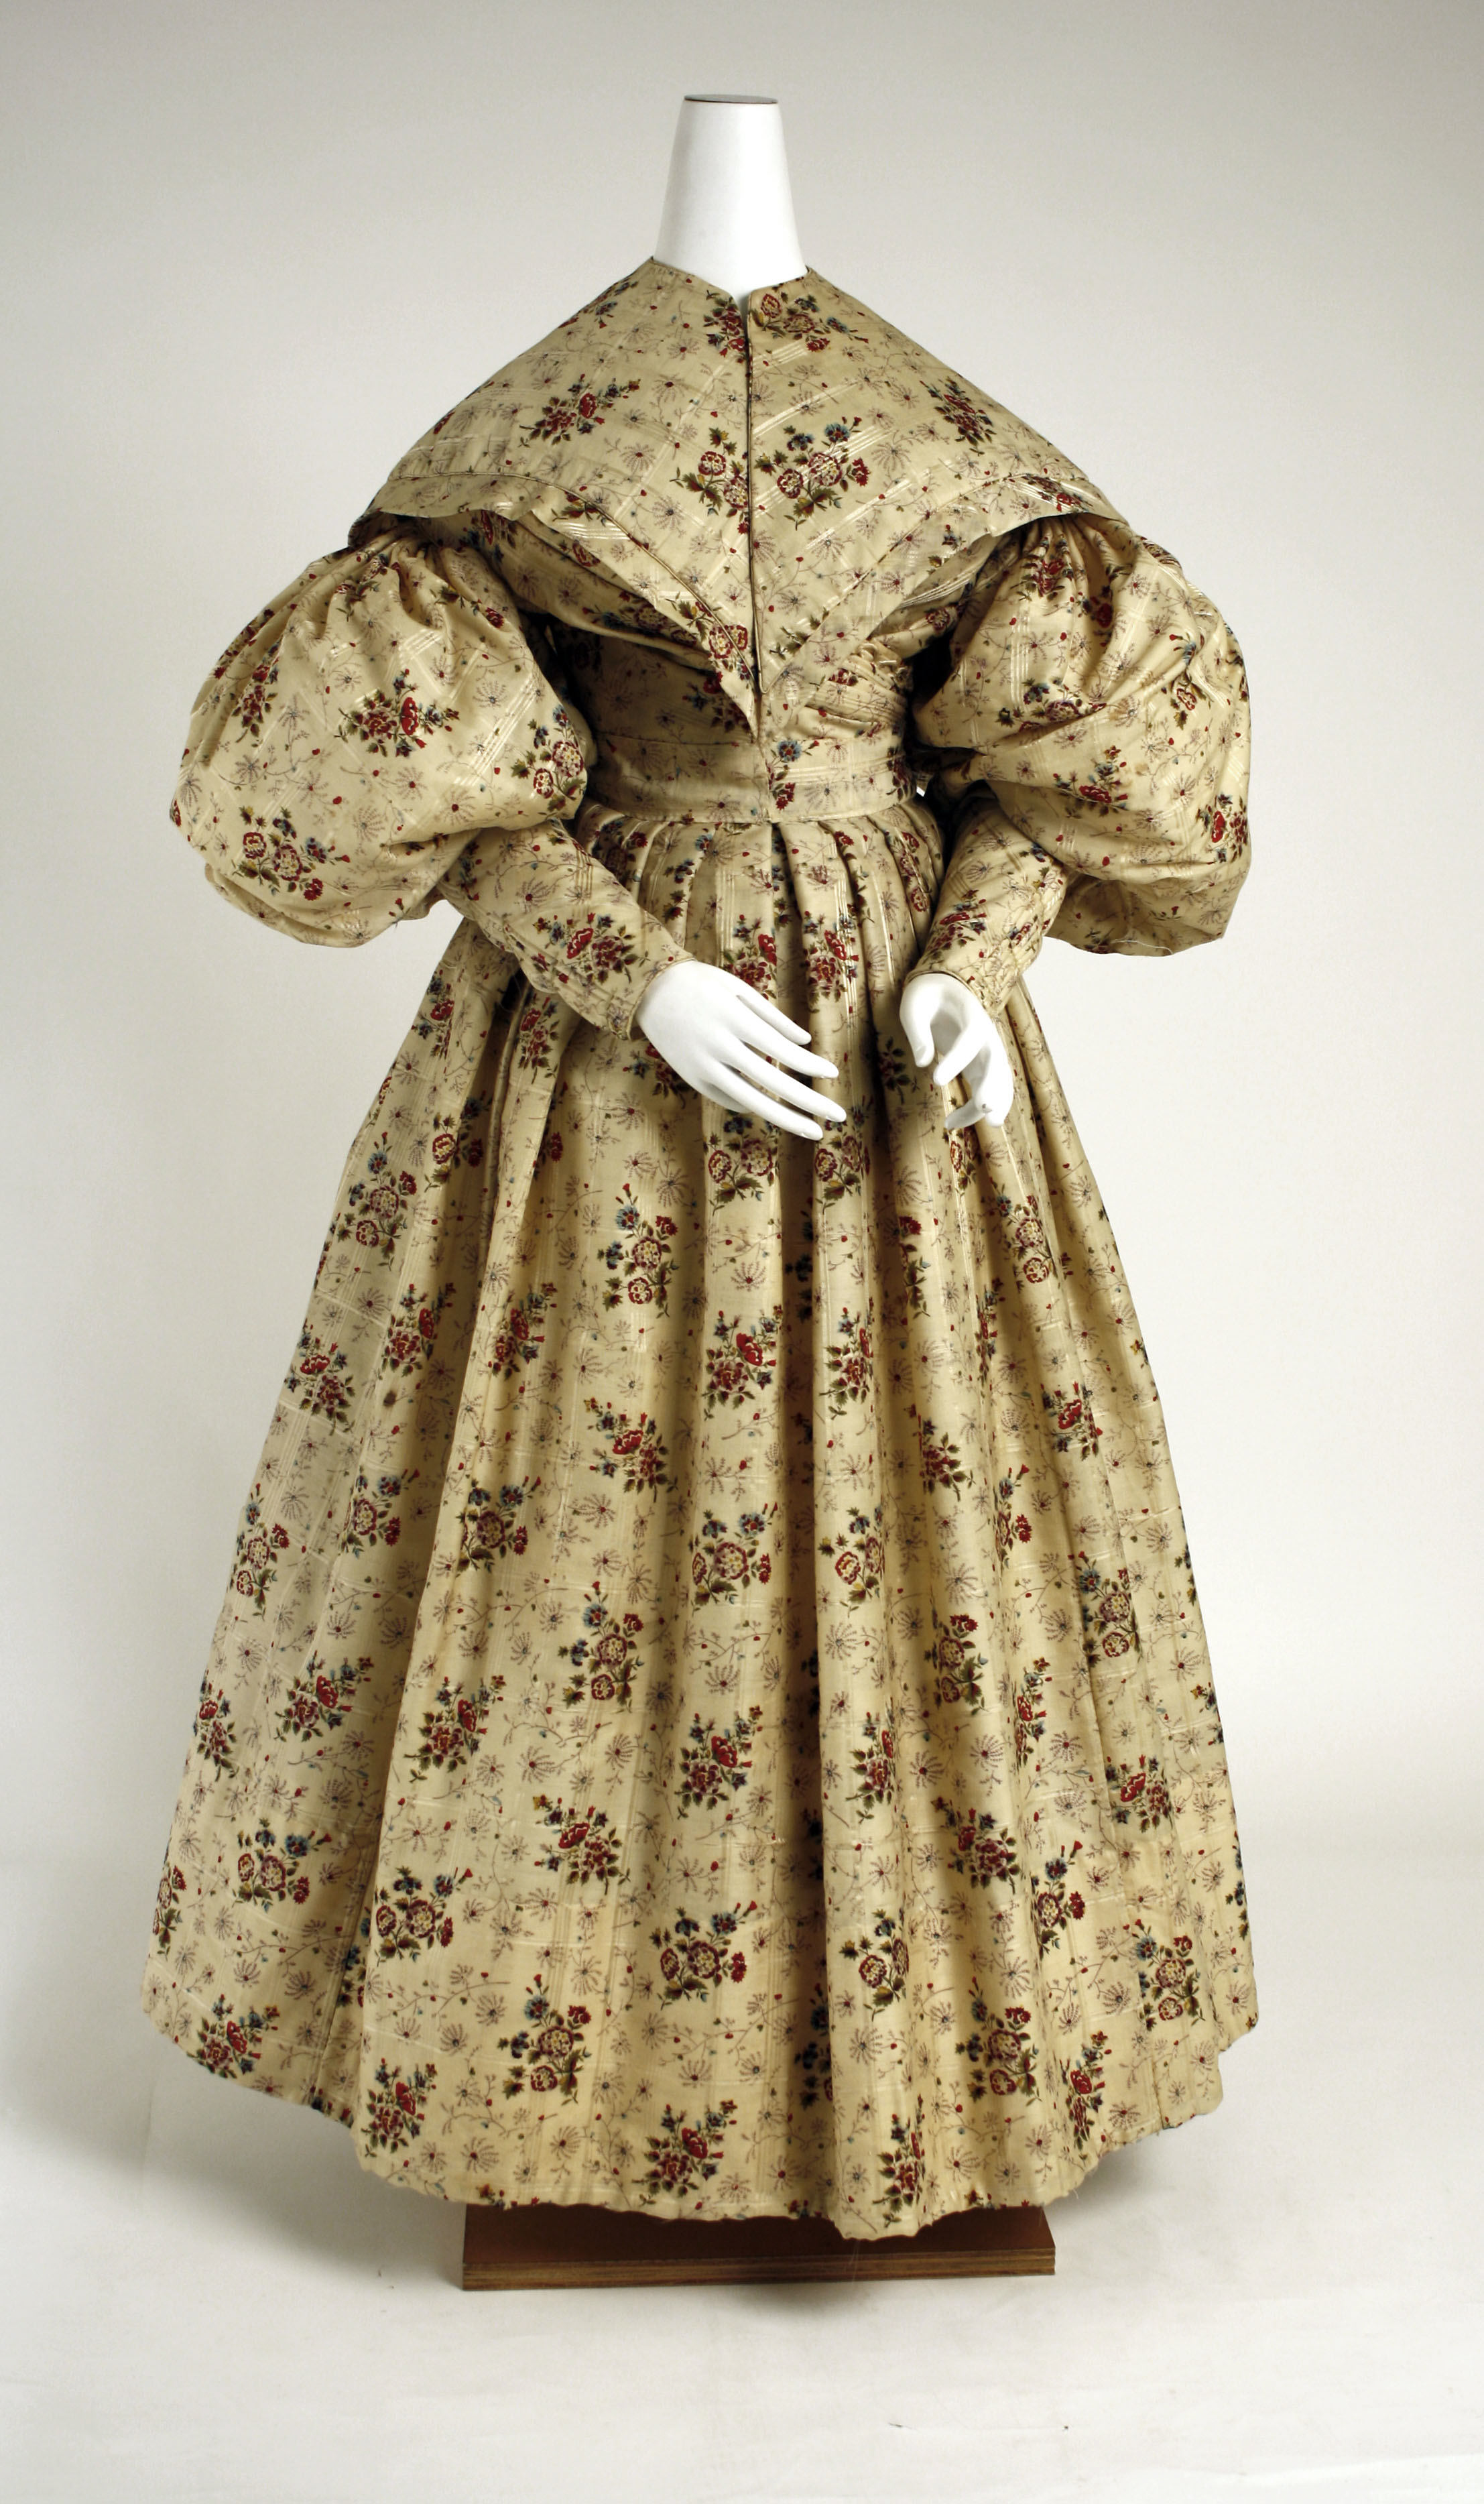 1830s Afternoon Dress | The Met Museum